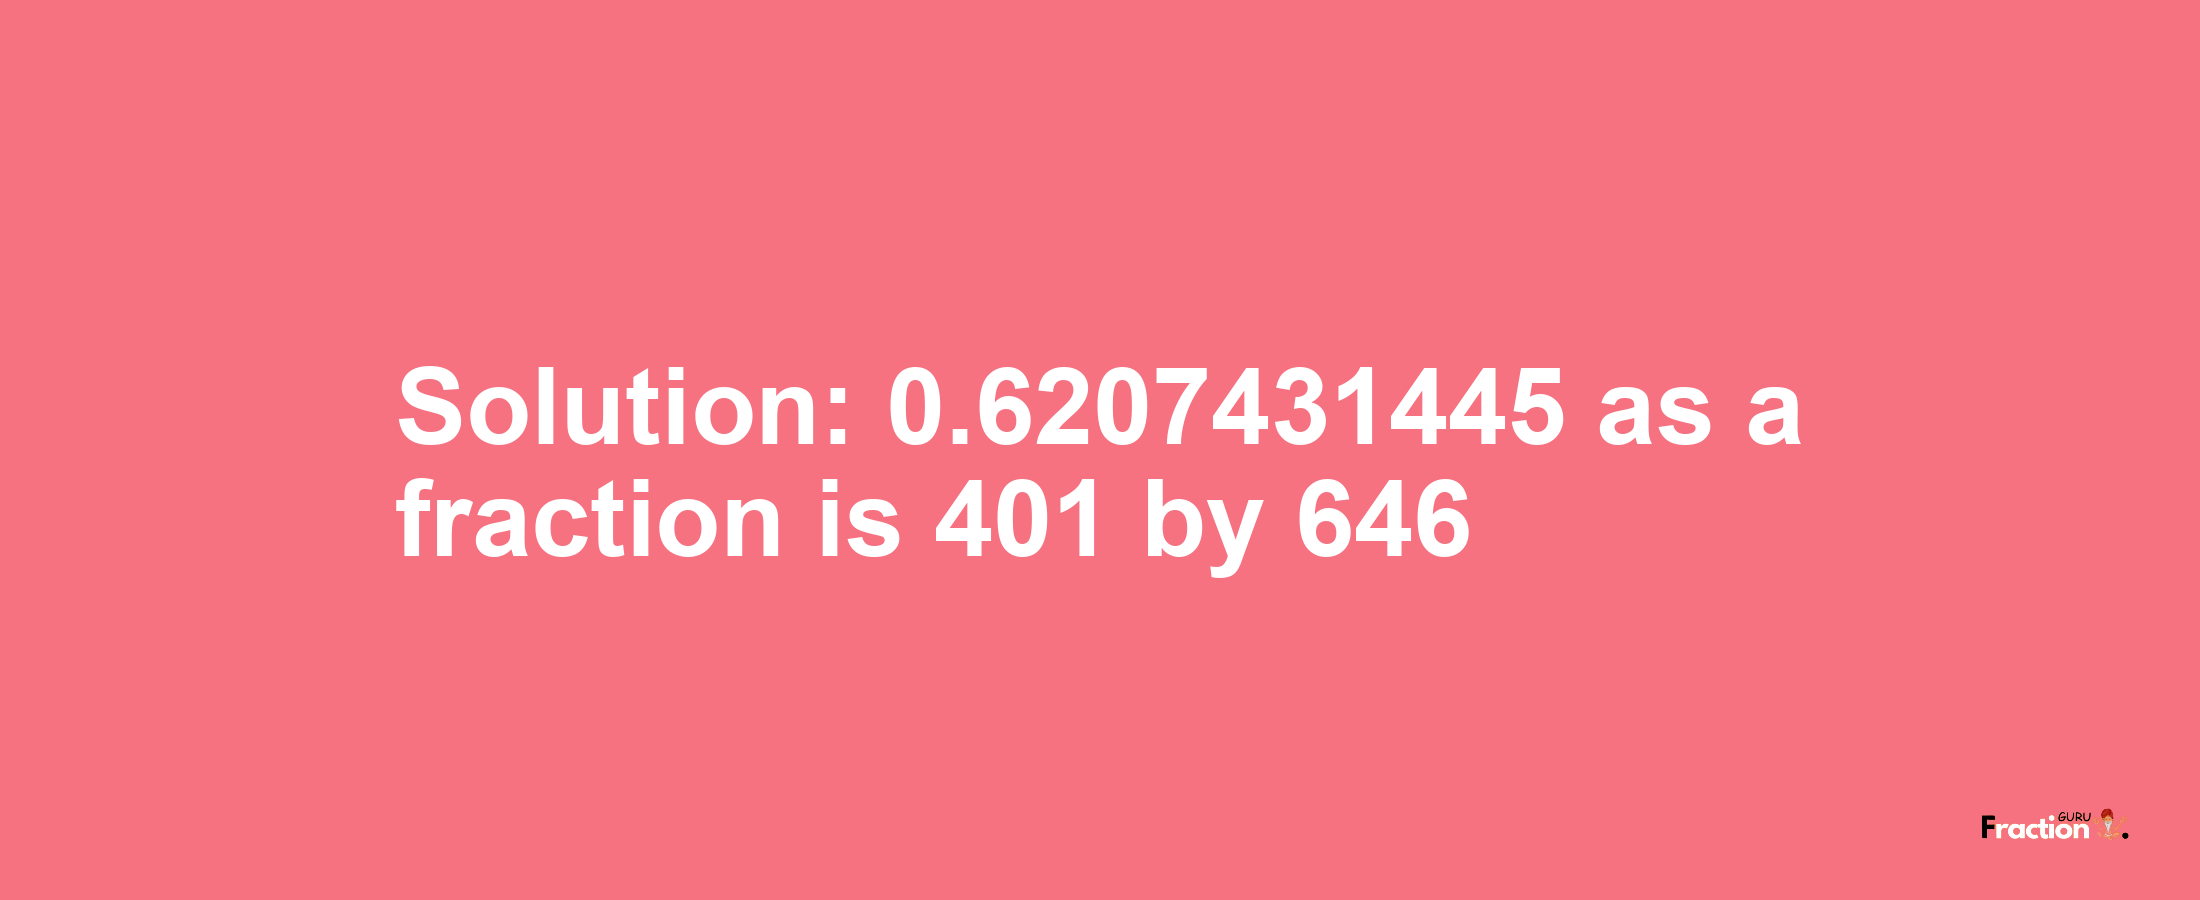 Solution:0.6207431445 as a fraction is 401/646